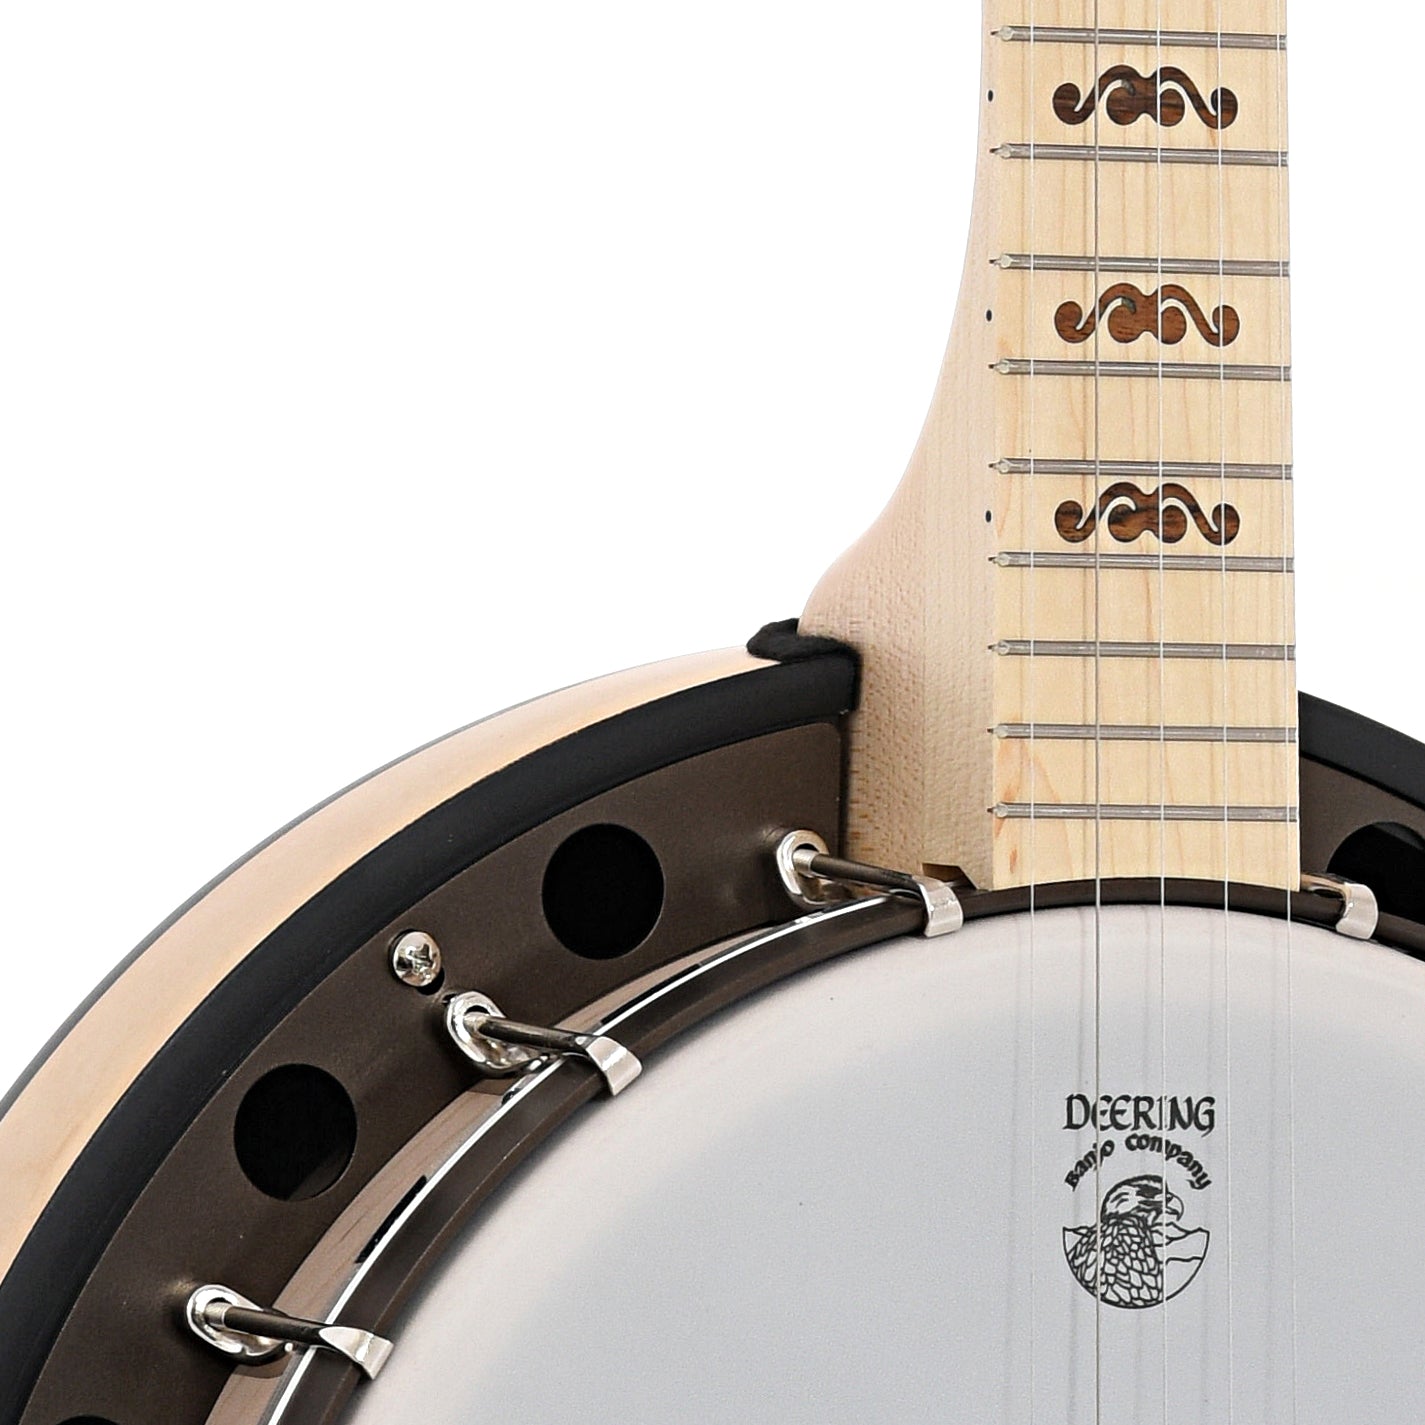 Neck and body  of Deering Goodtime 2 Limited Edition Bronze Resonator Banjo